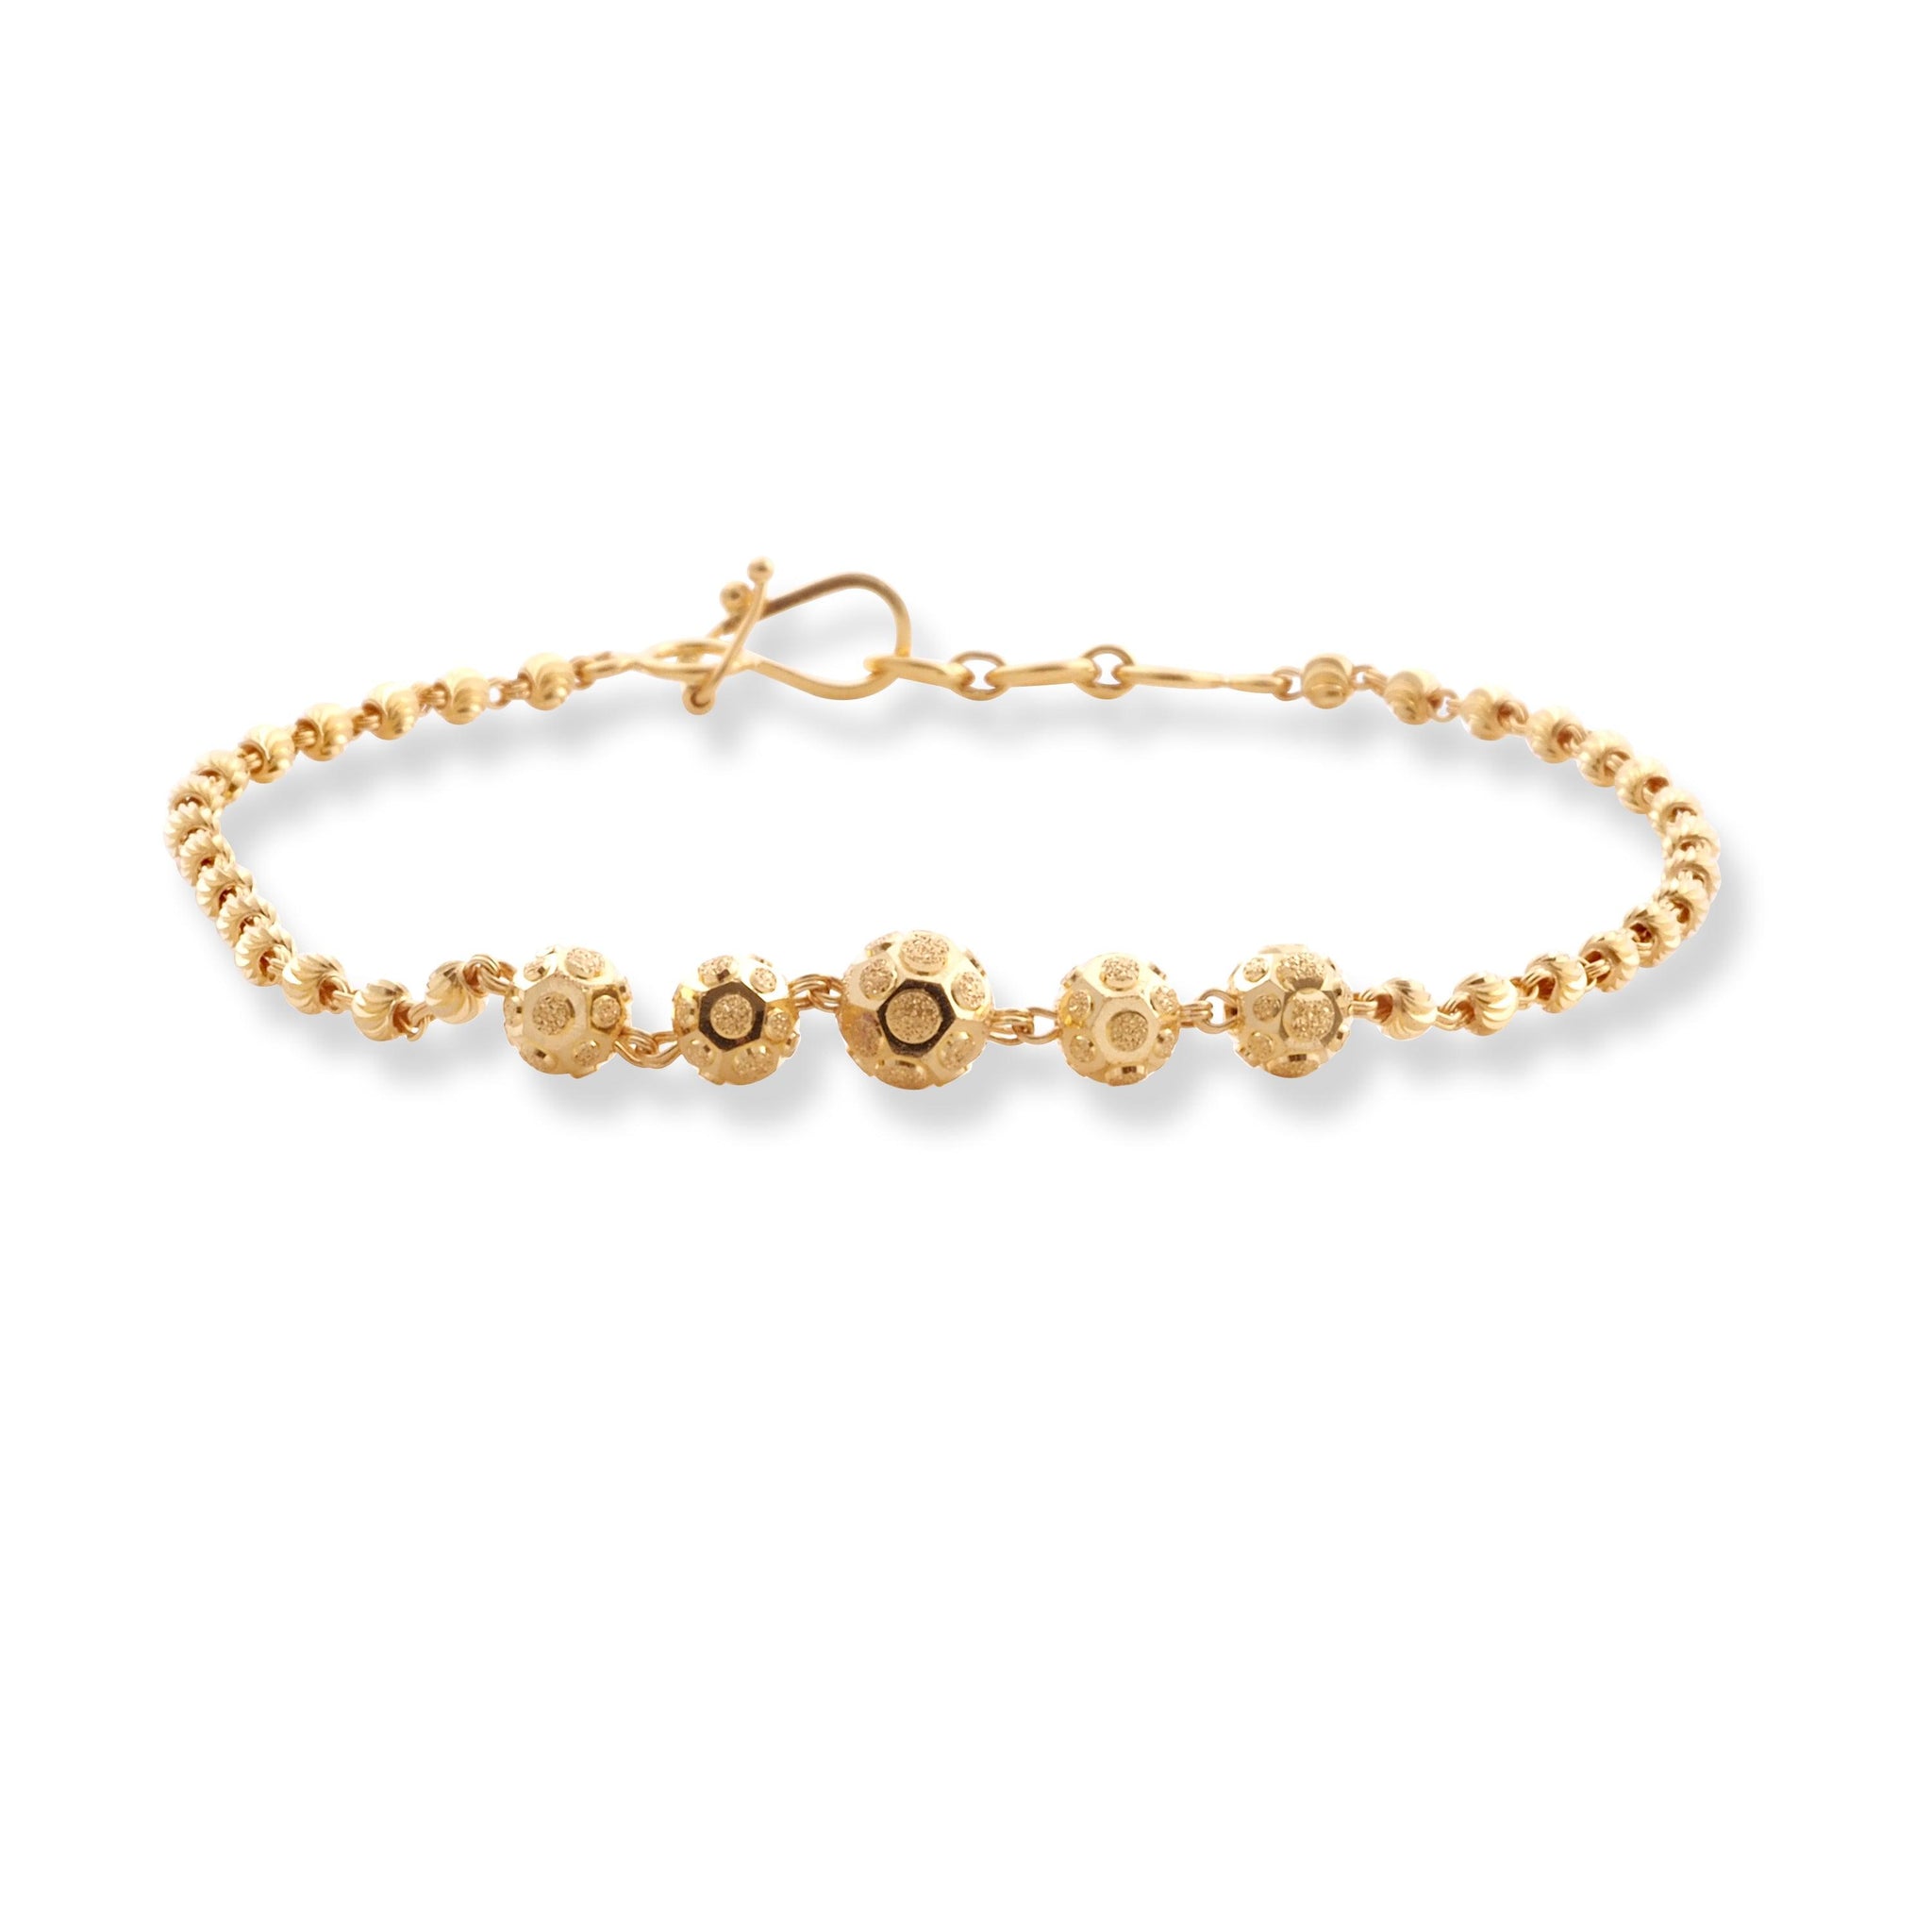 22ct Gold Bracelet with Diamond Cut Beads and Hook Clasp LBR-8515